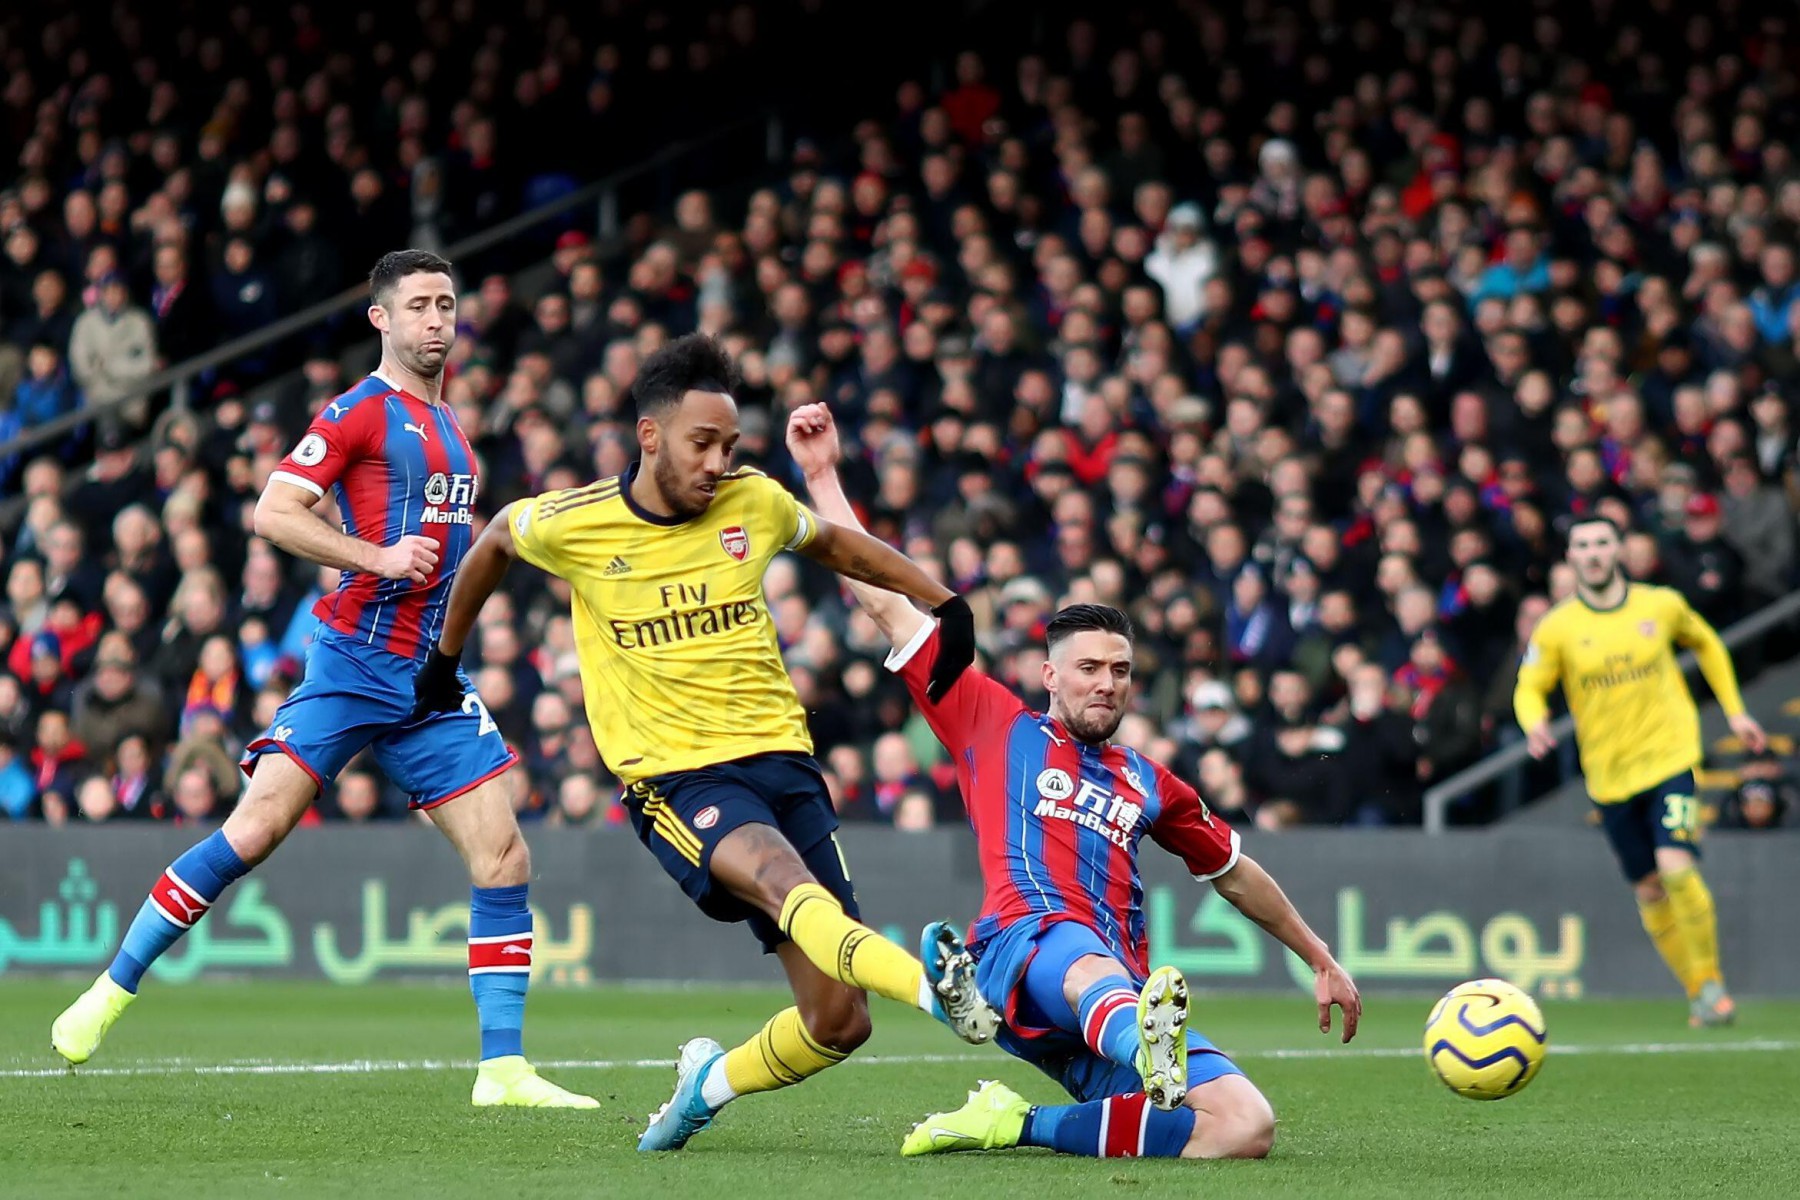 Pierre-Emerick Aubameyang gave Arsenal the lead with a clinical finish into the bottom corner